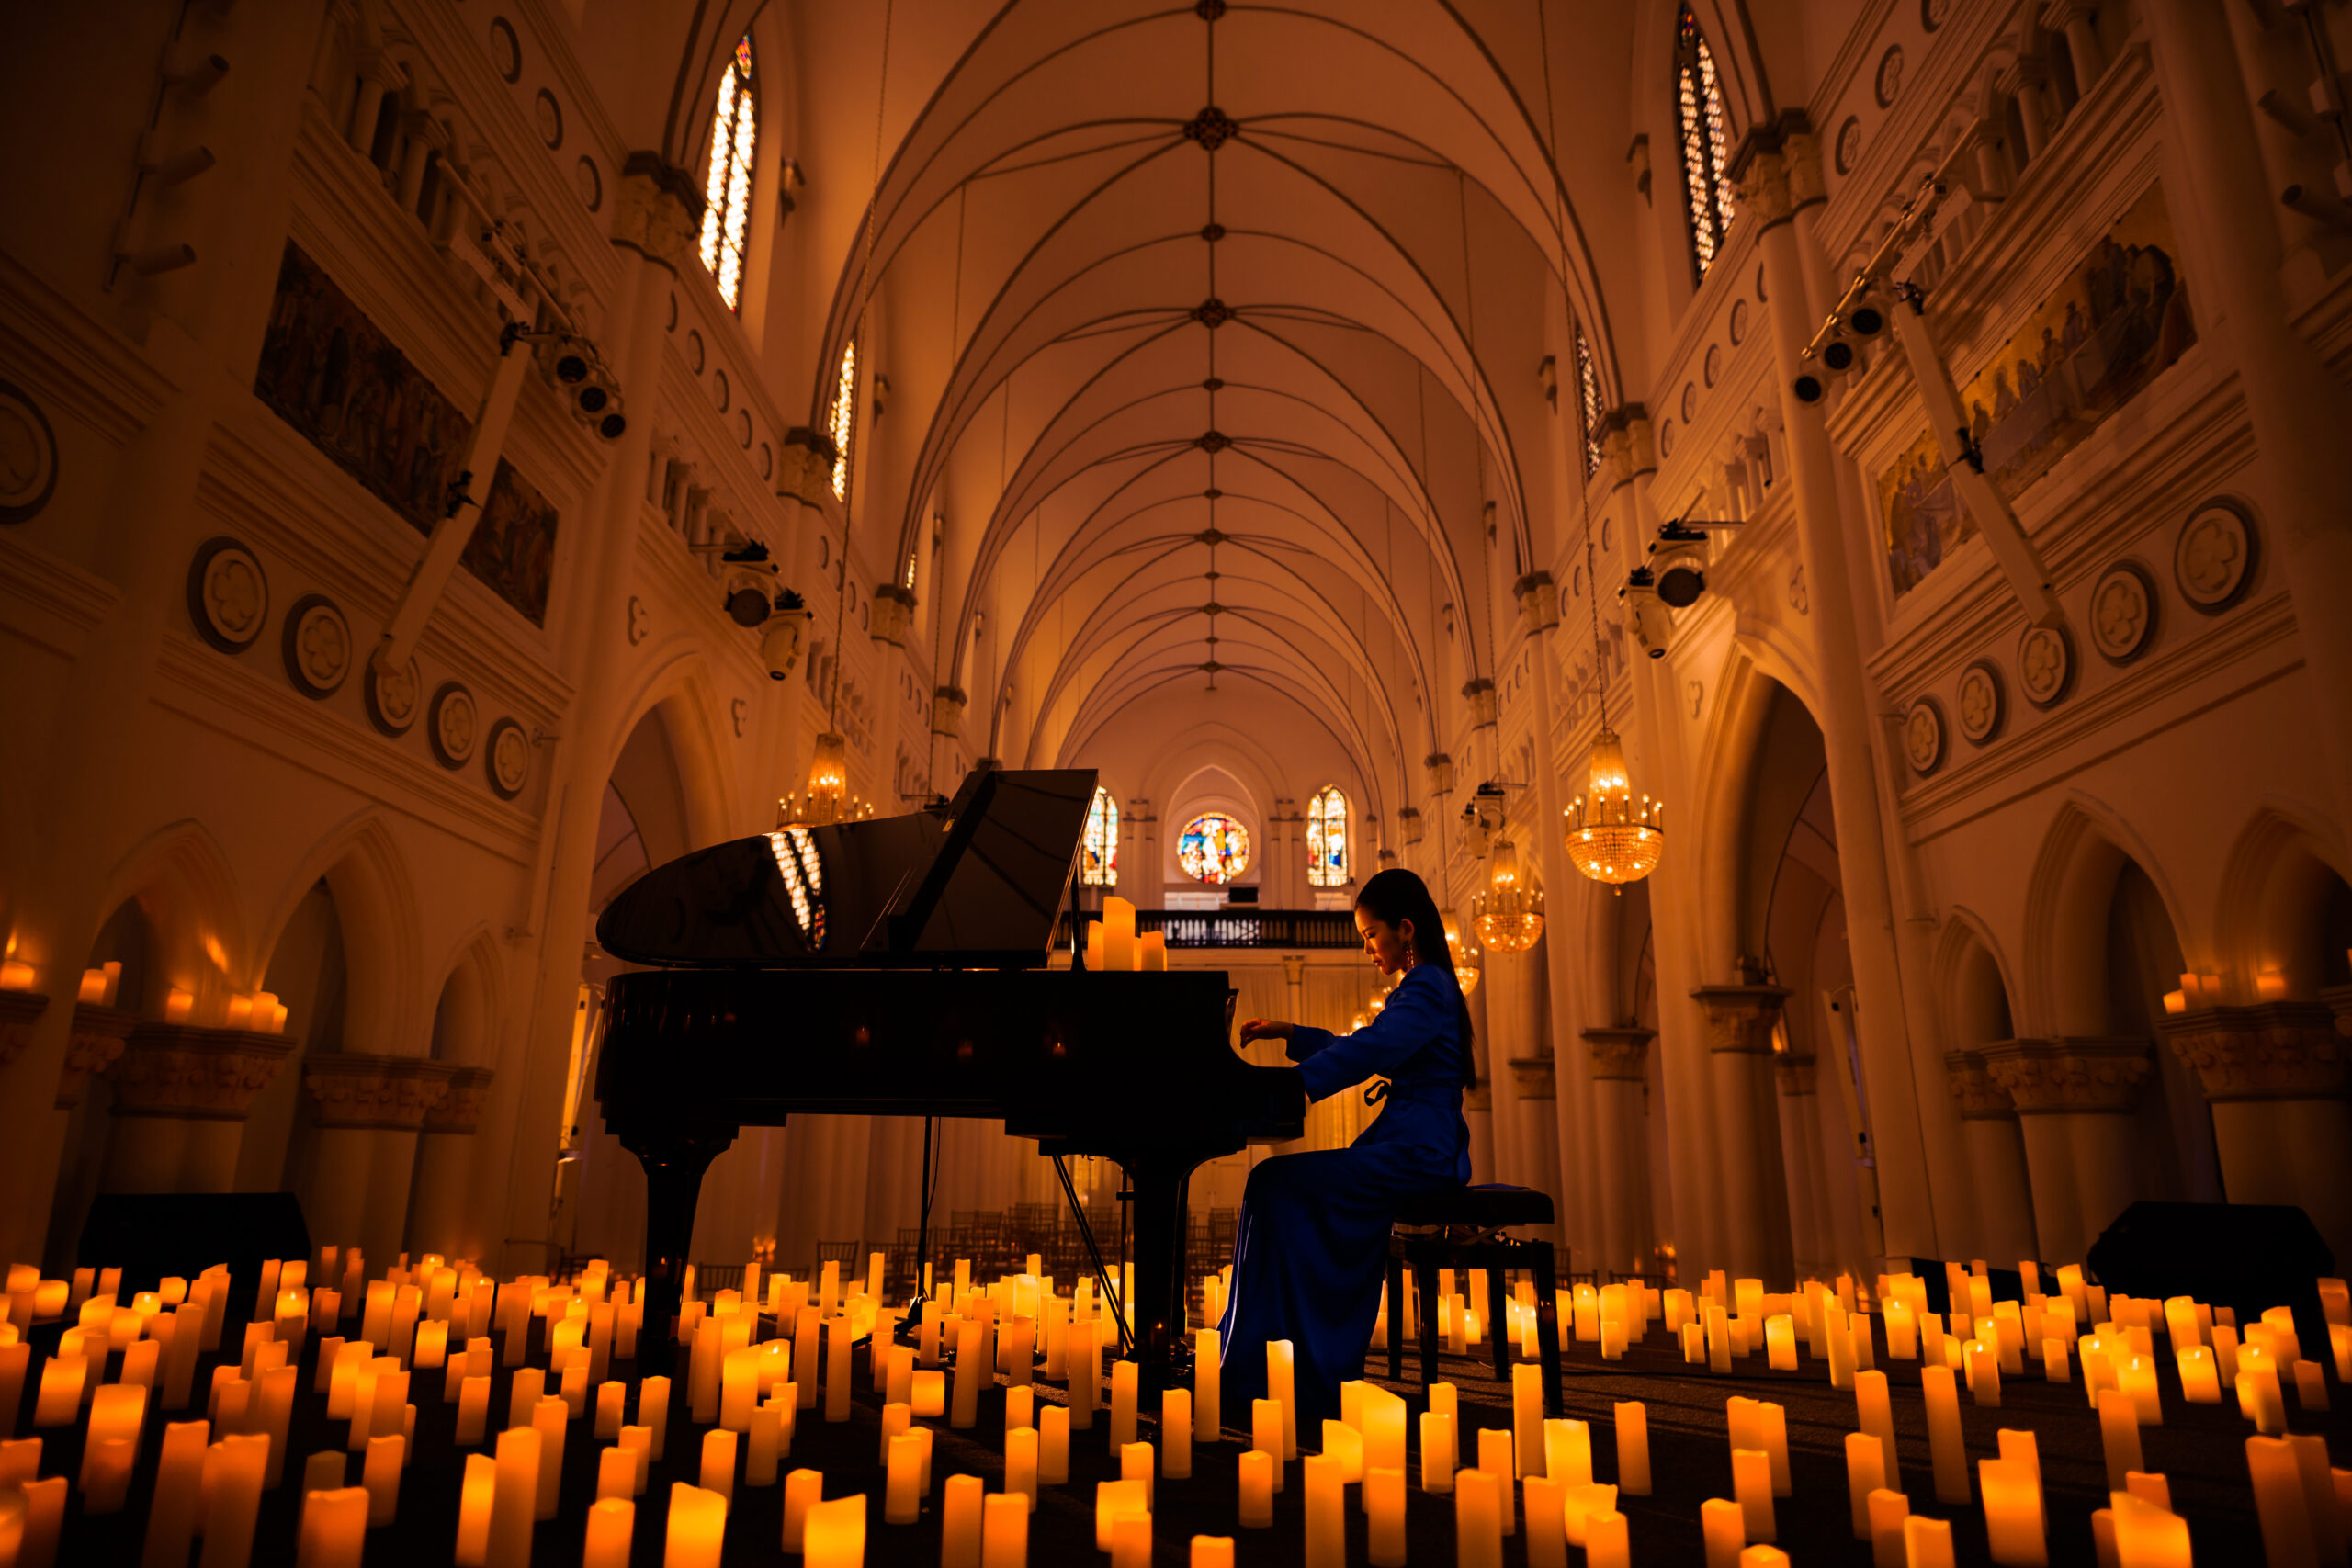 Enjoy Candlelight Concerts in Stunning Portland Venues